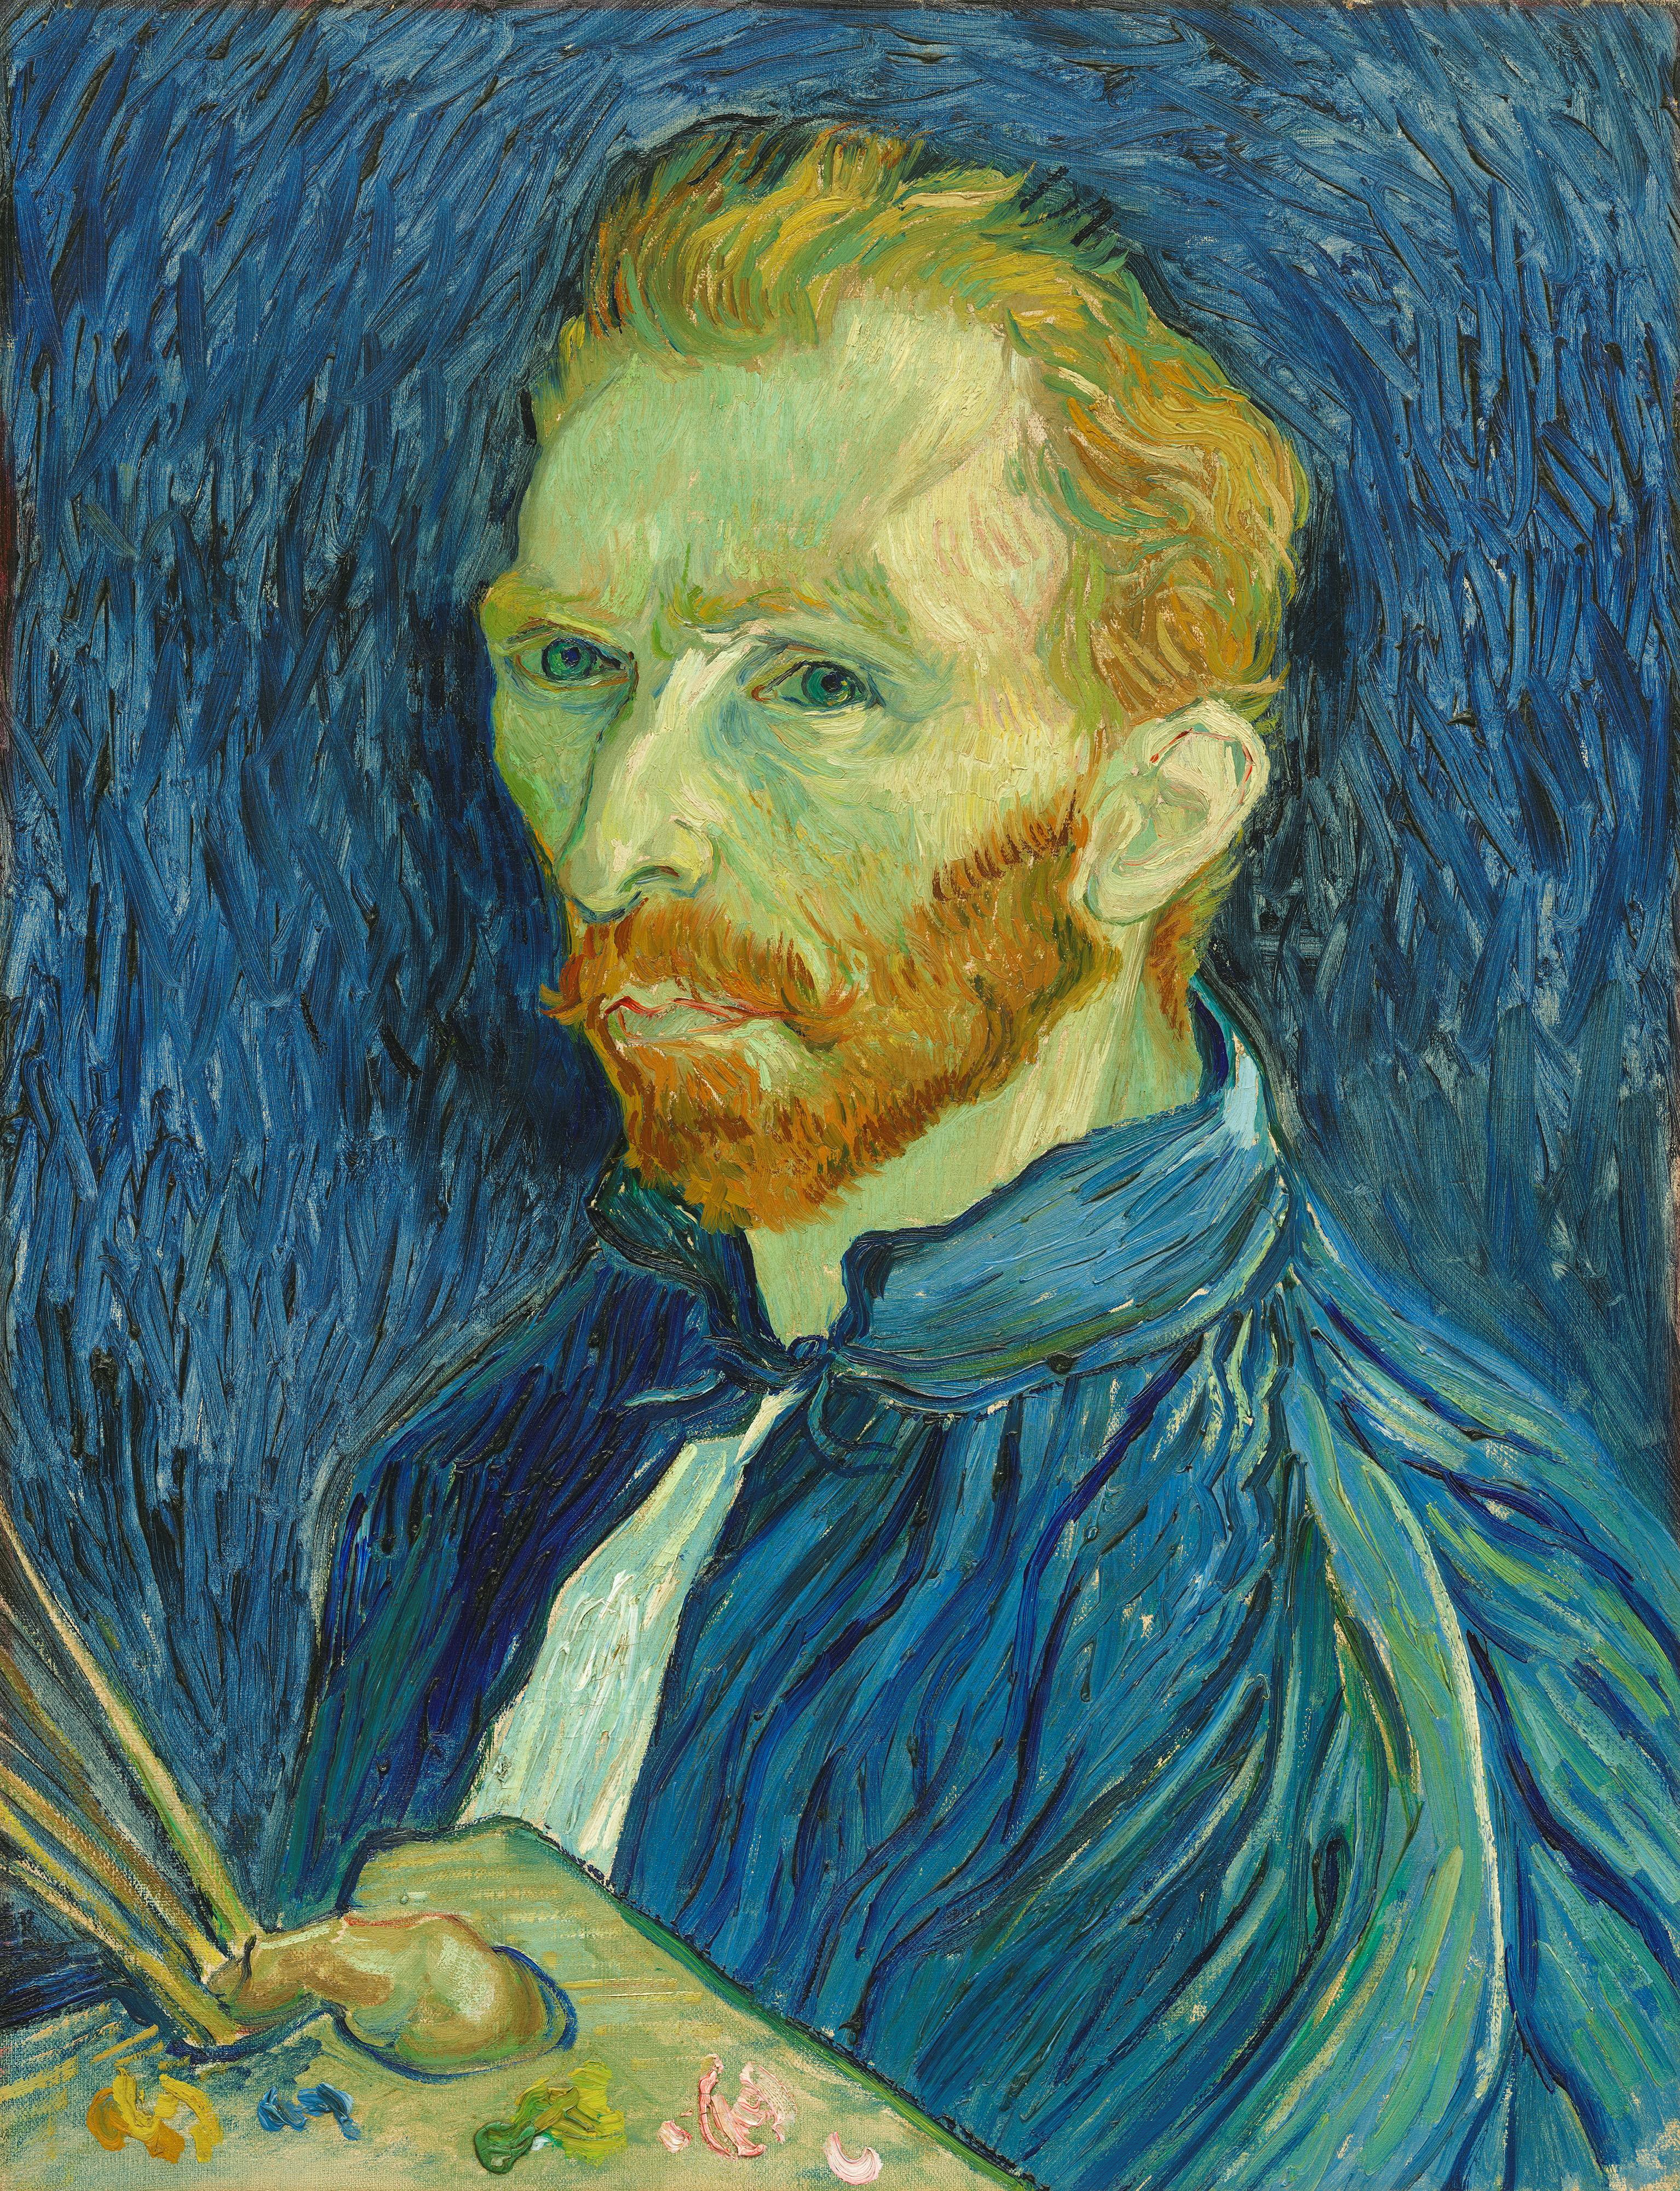 Self-portrait from 1889 painted by Vincent van Gogh (1853-1890) obtained on June 30, 2021. Courtesy of The Courtauld/Handout via REUTERS THIS IMAGE HAS BEEN SUPPLIED BY A THIRD PARTY. NO NEW USES AFTER JULY 30, 2021.